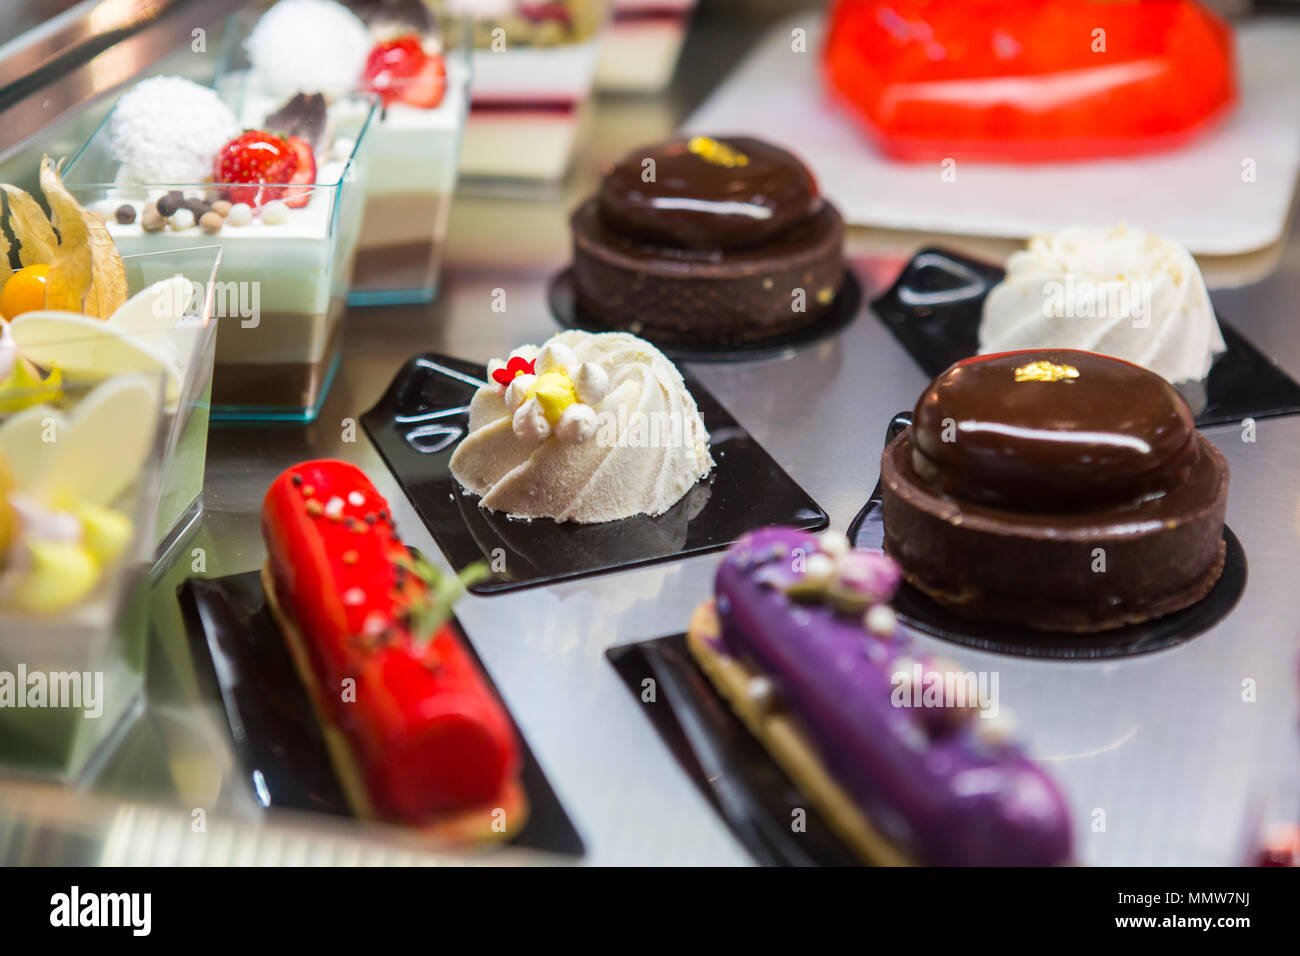 Delicious variety of sweet dessert on display in an exhibition. Stock Photo